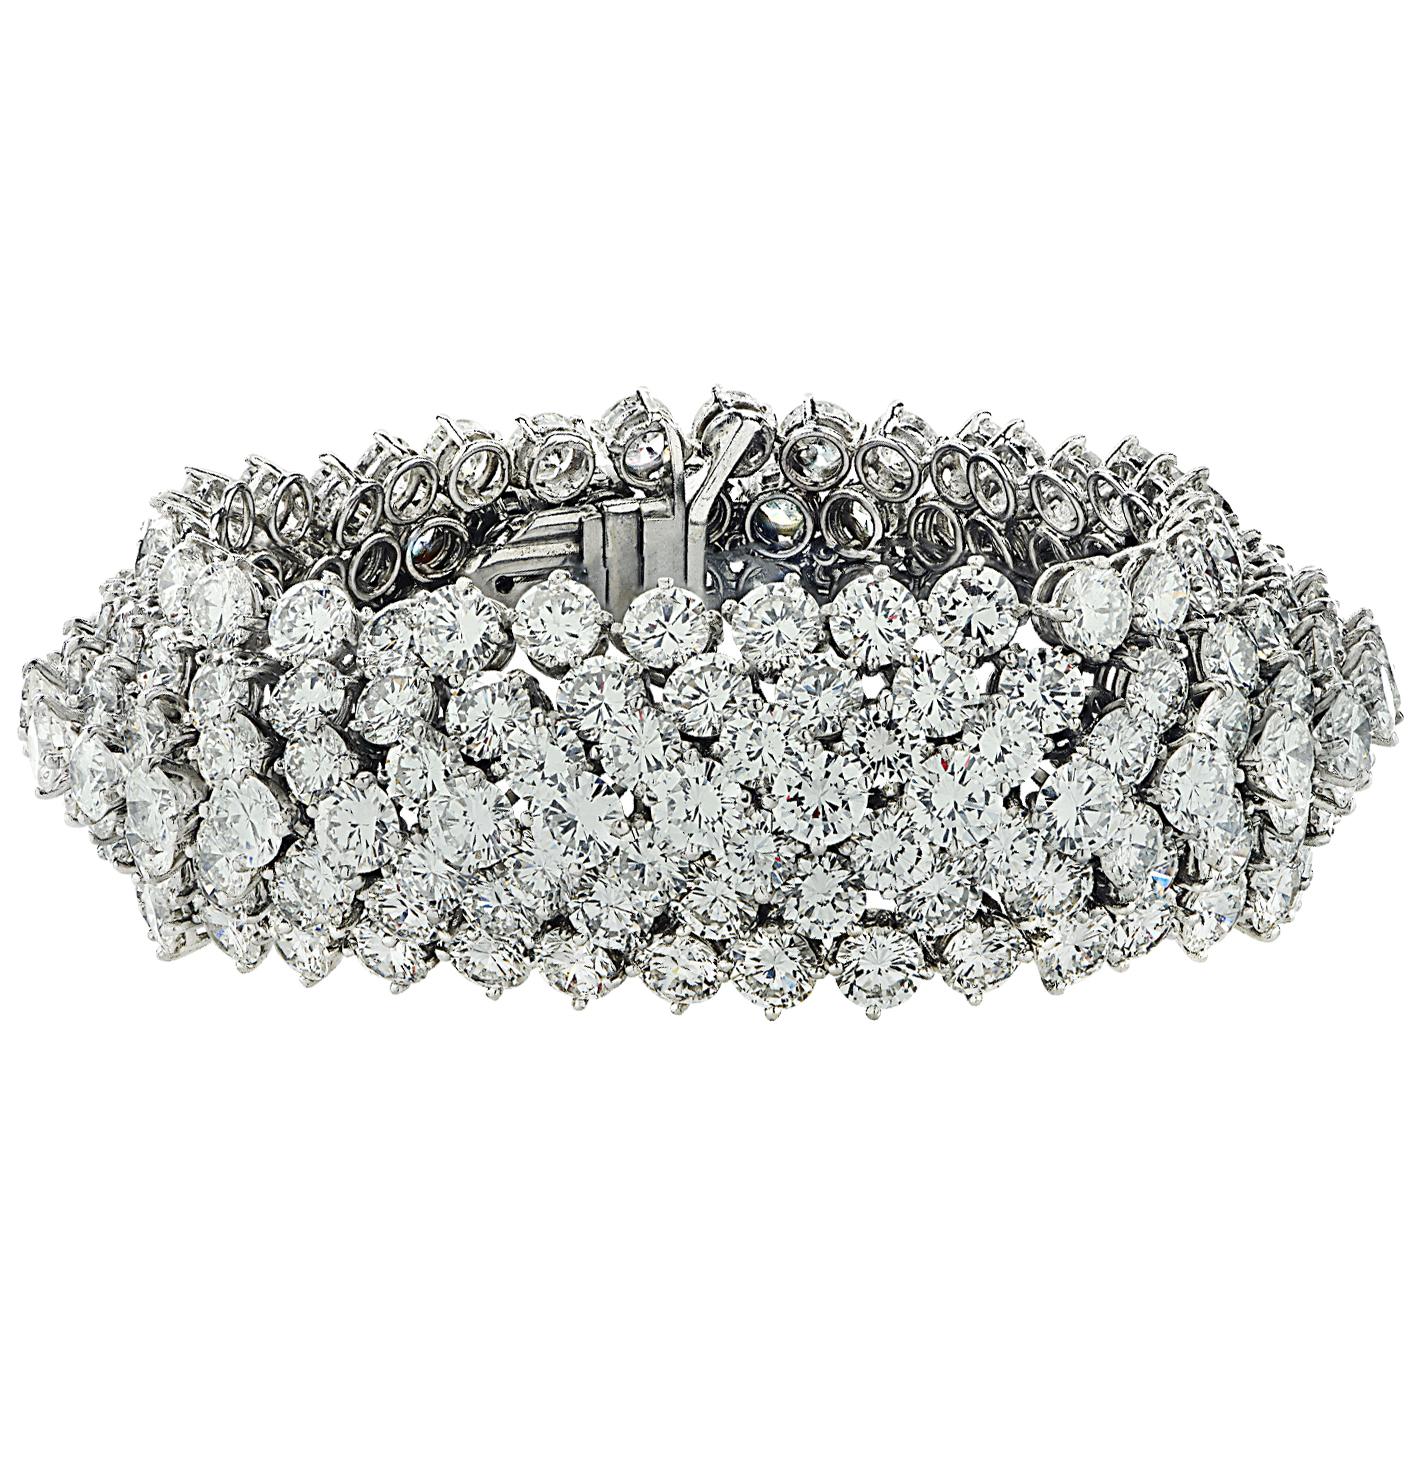 Spectacular diamond bangle bracelet crafted in platinum, featuring 245 round brilliant cut diamonds weighing approximately 78 carats total, D-F color, VVS-VS clarity. Layers of diamonds, varying in size, lace together to create this dynamic bangle